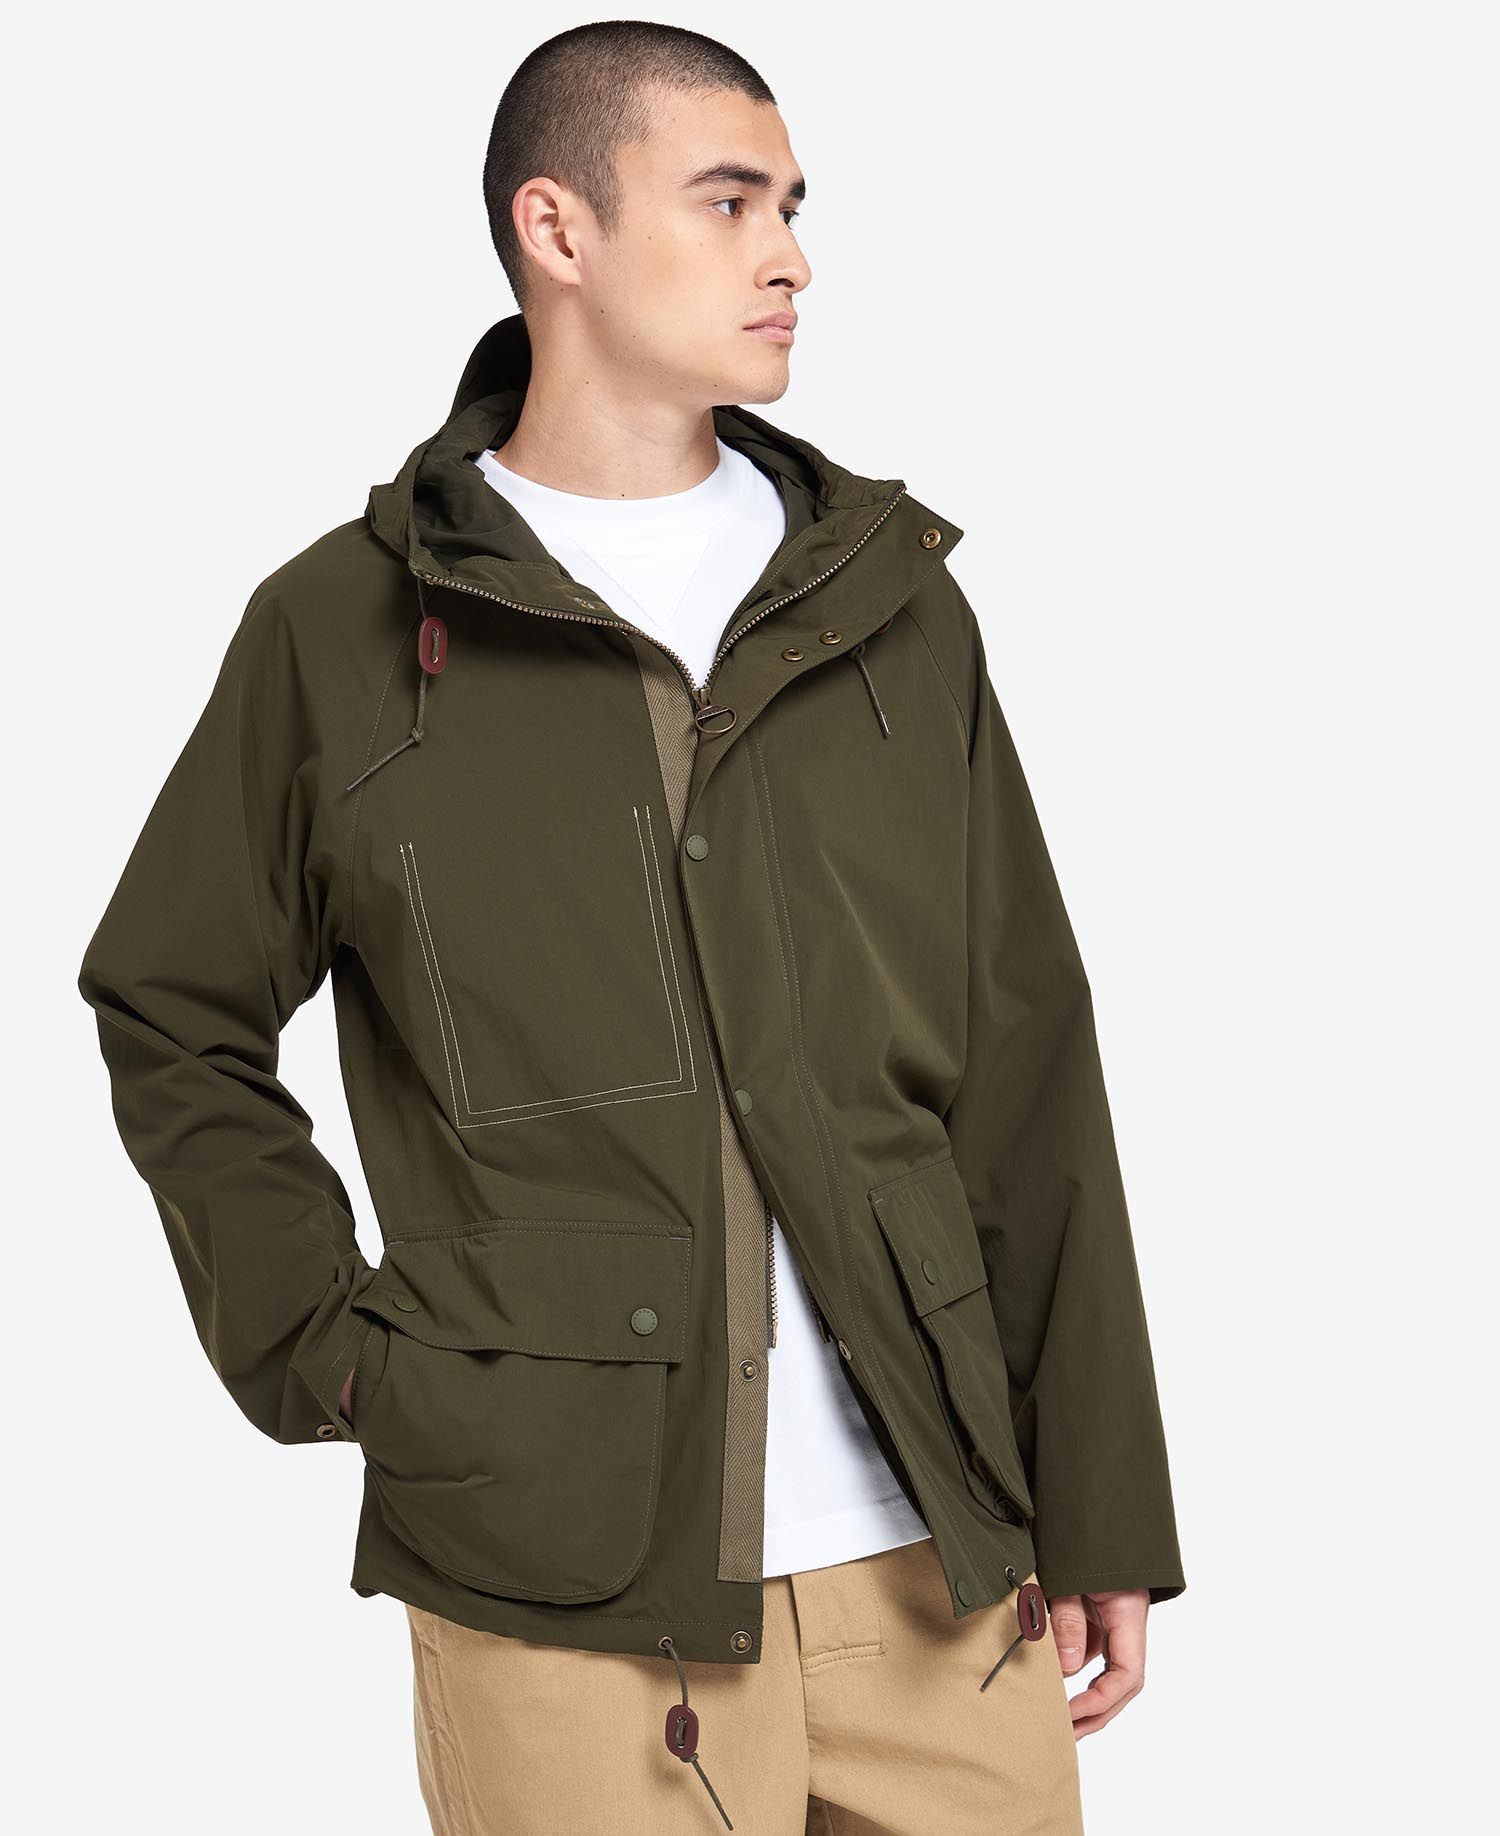 Shop the Barbour Coat today. | Barbour